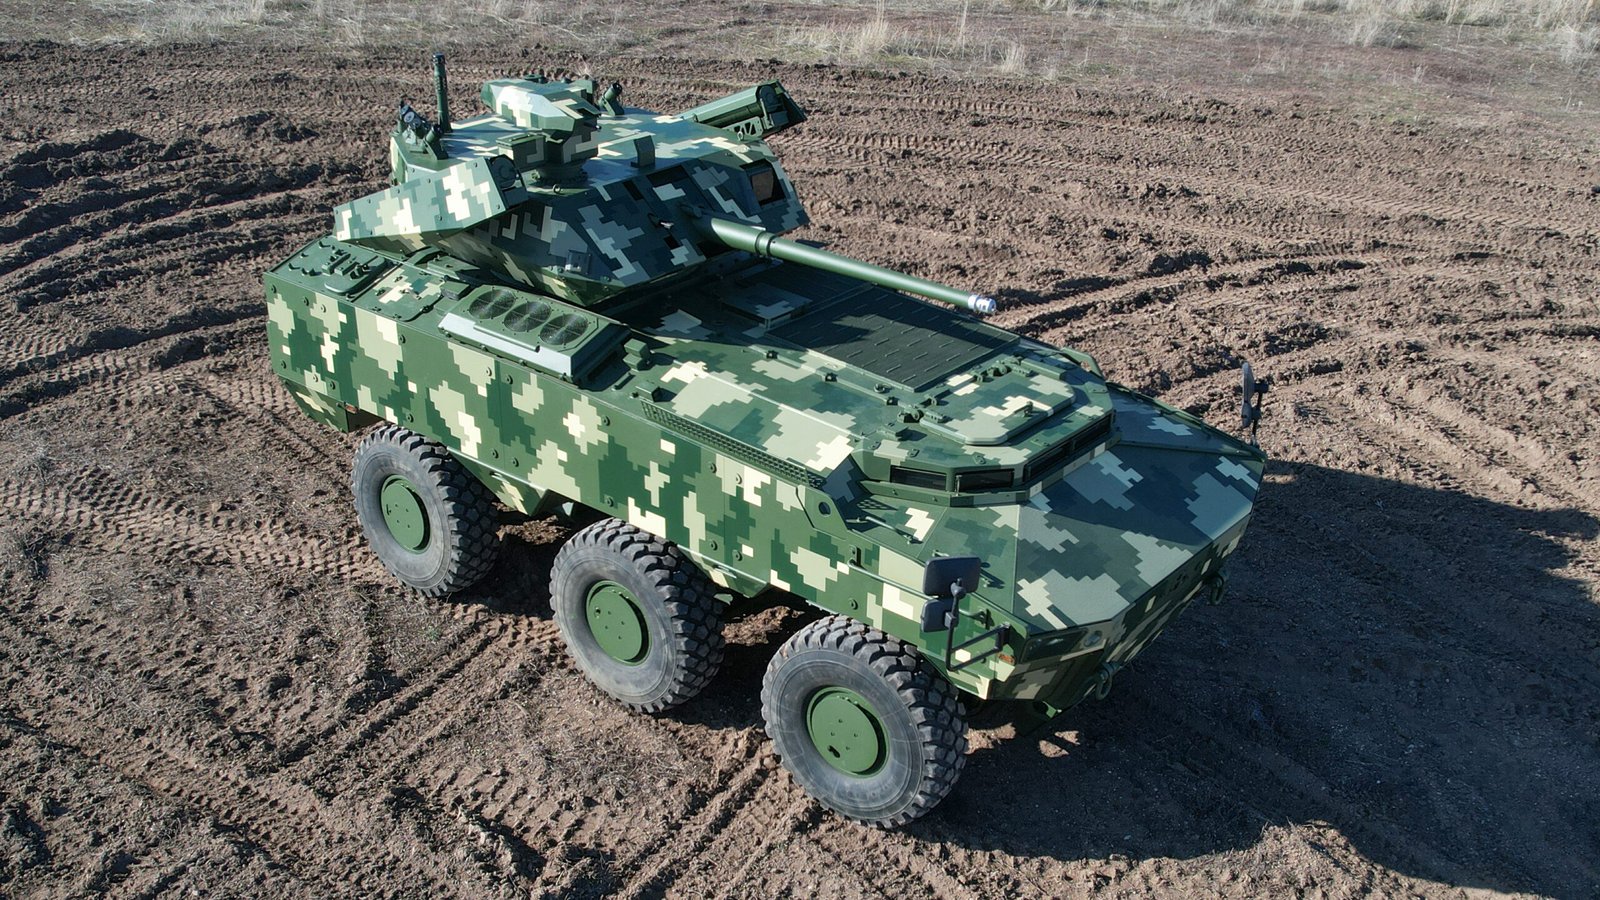 Turkish armored vehicle maker unveils new fire support vehicle